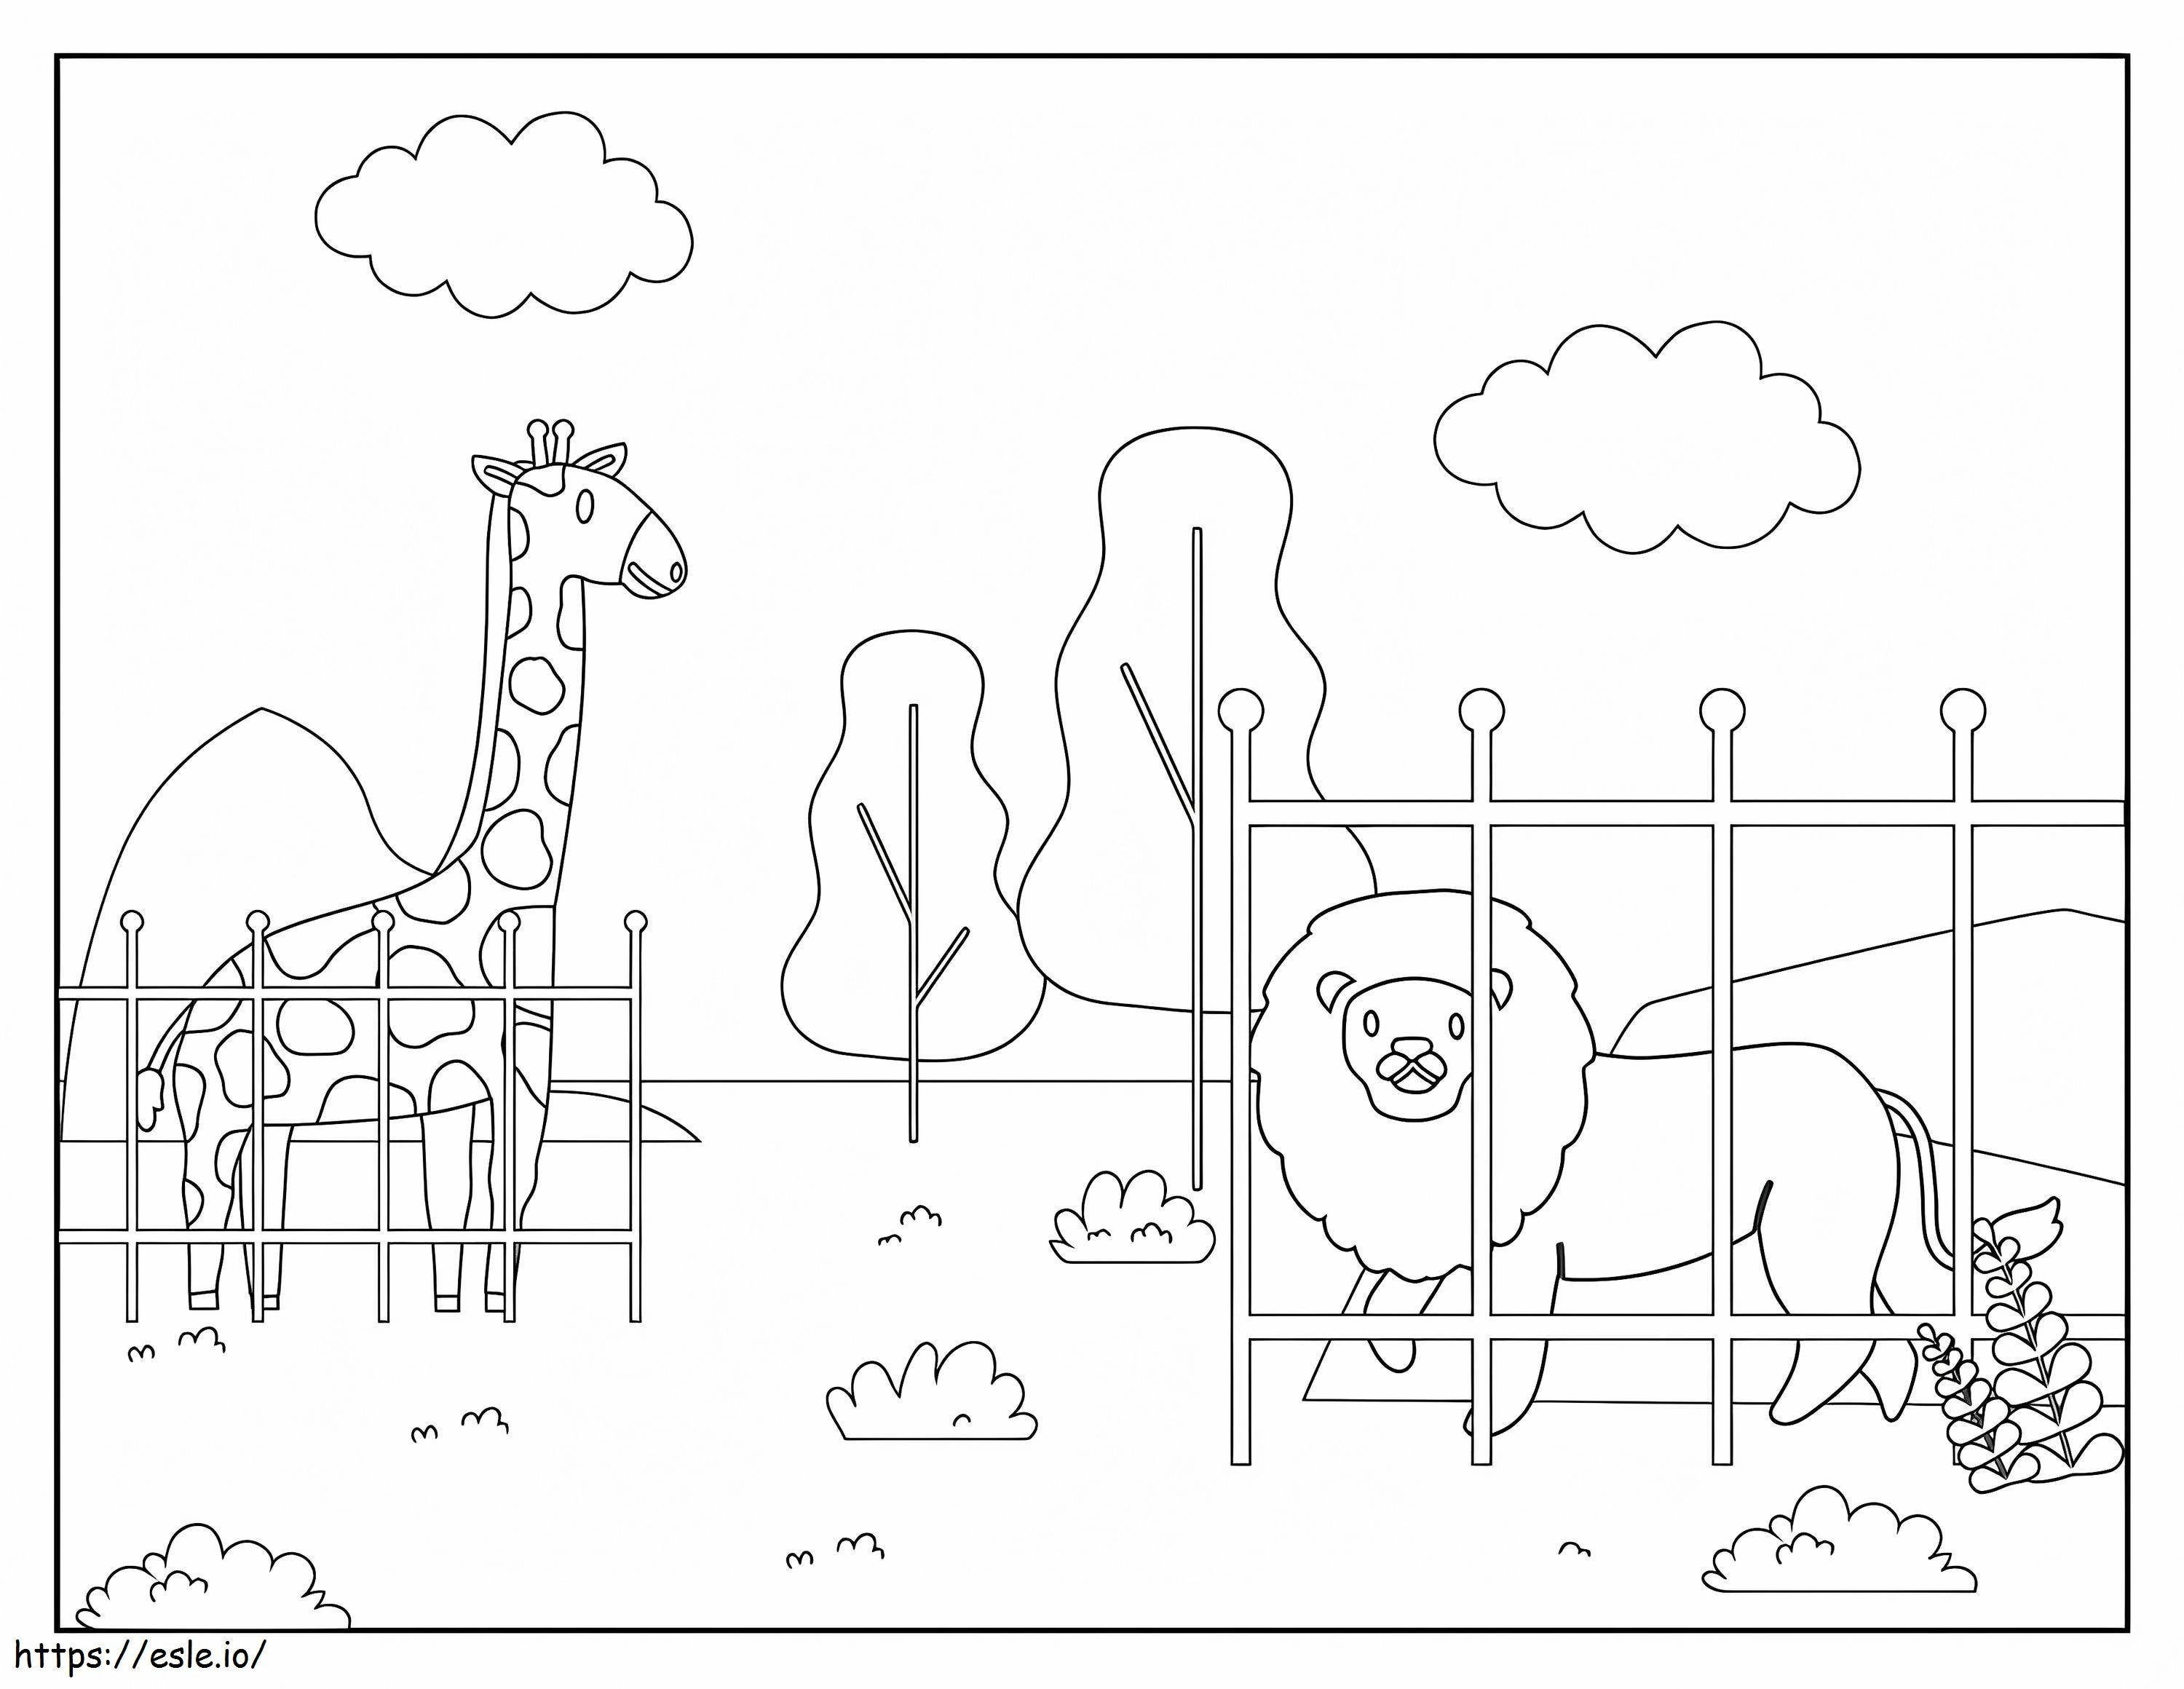 Perfect Zoology coloring page